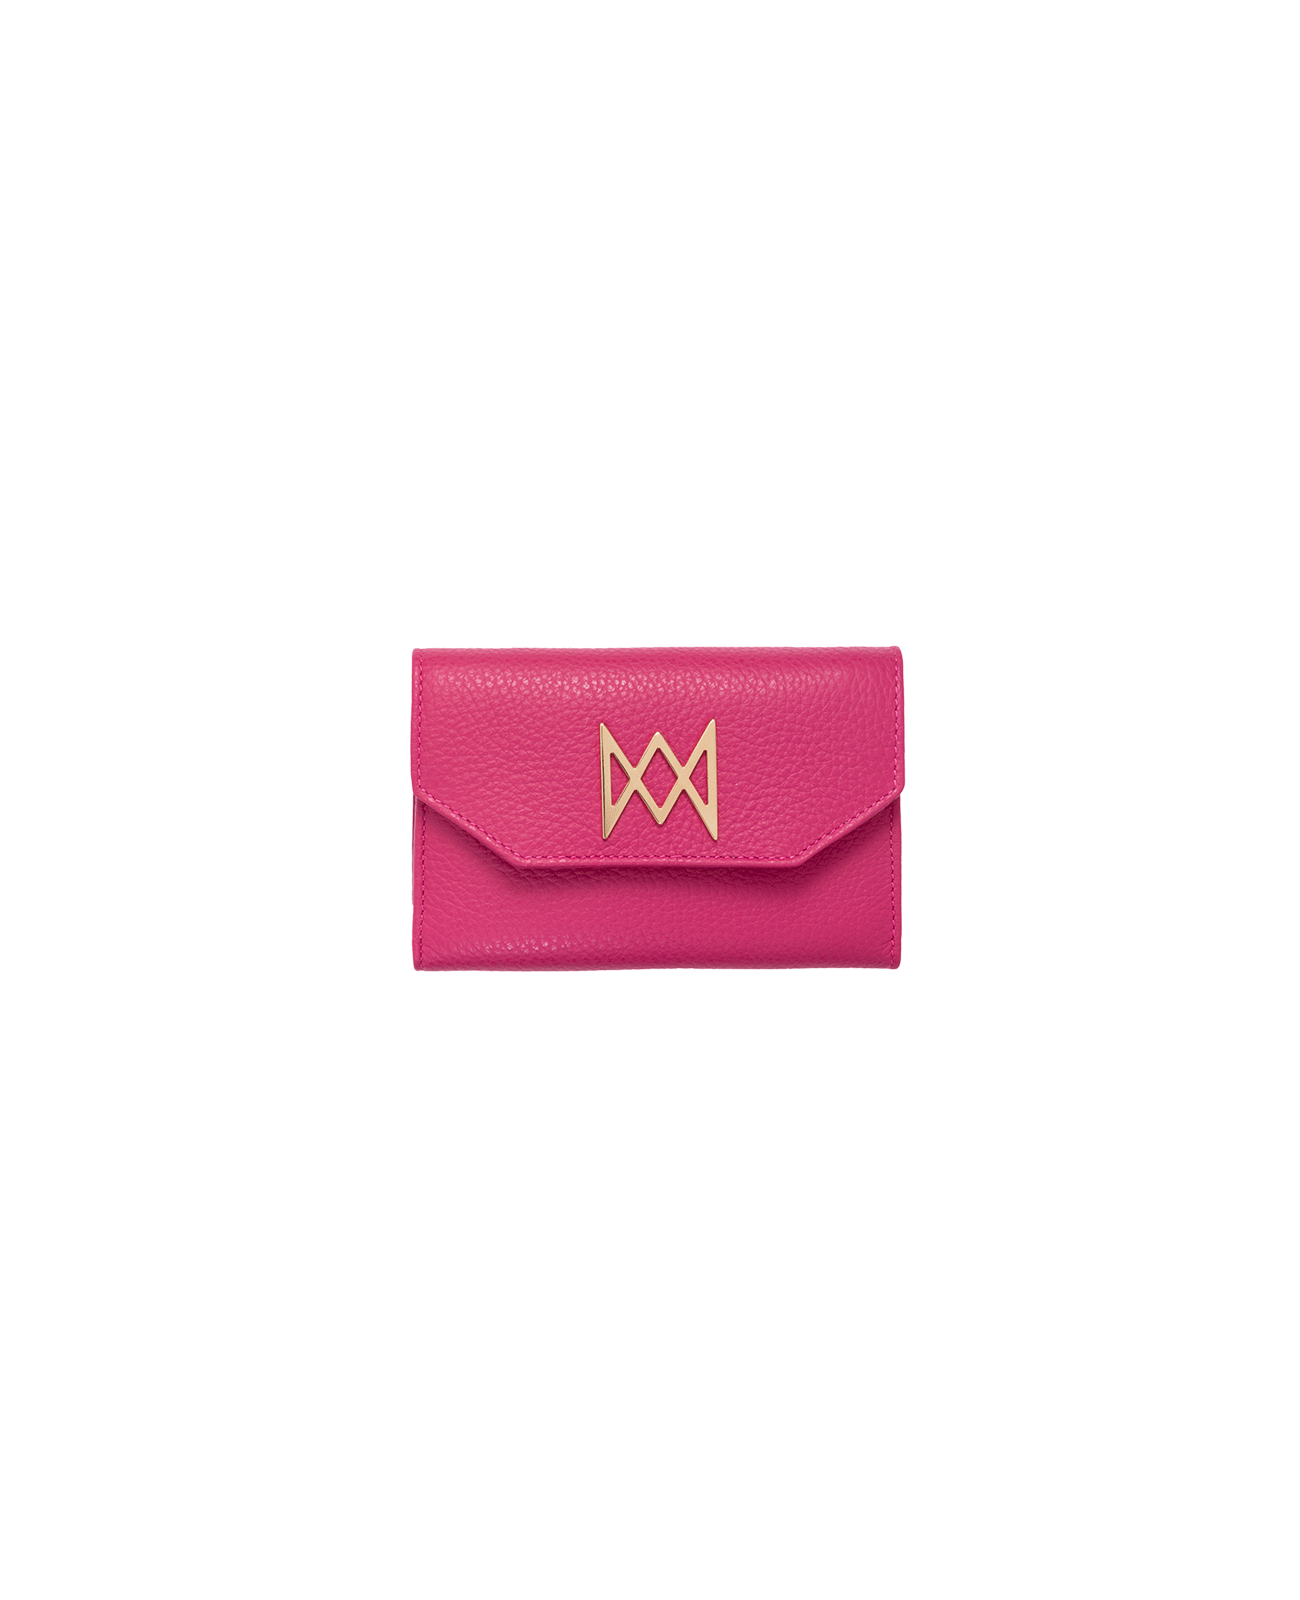 Wallet in Italian full-grain leather. Designed to carry your personal items. Available in a variety of styles and designs. Color: Orchidea. Size: Mini